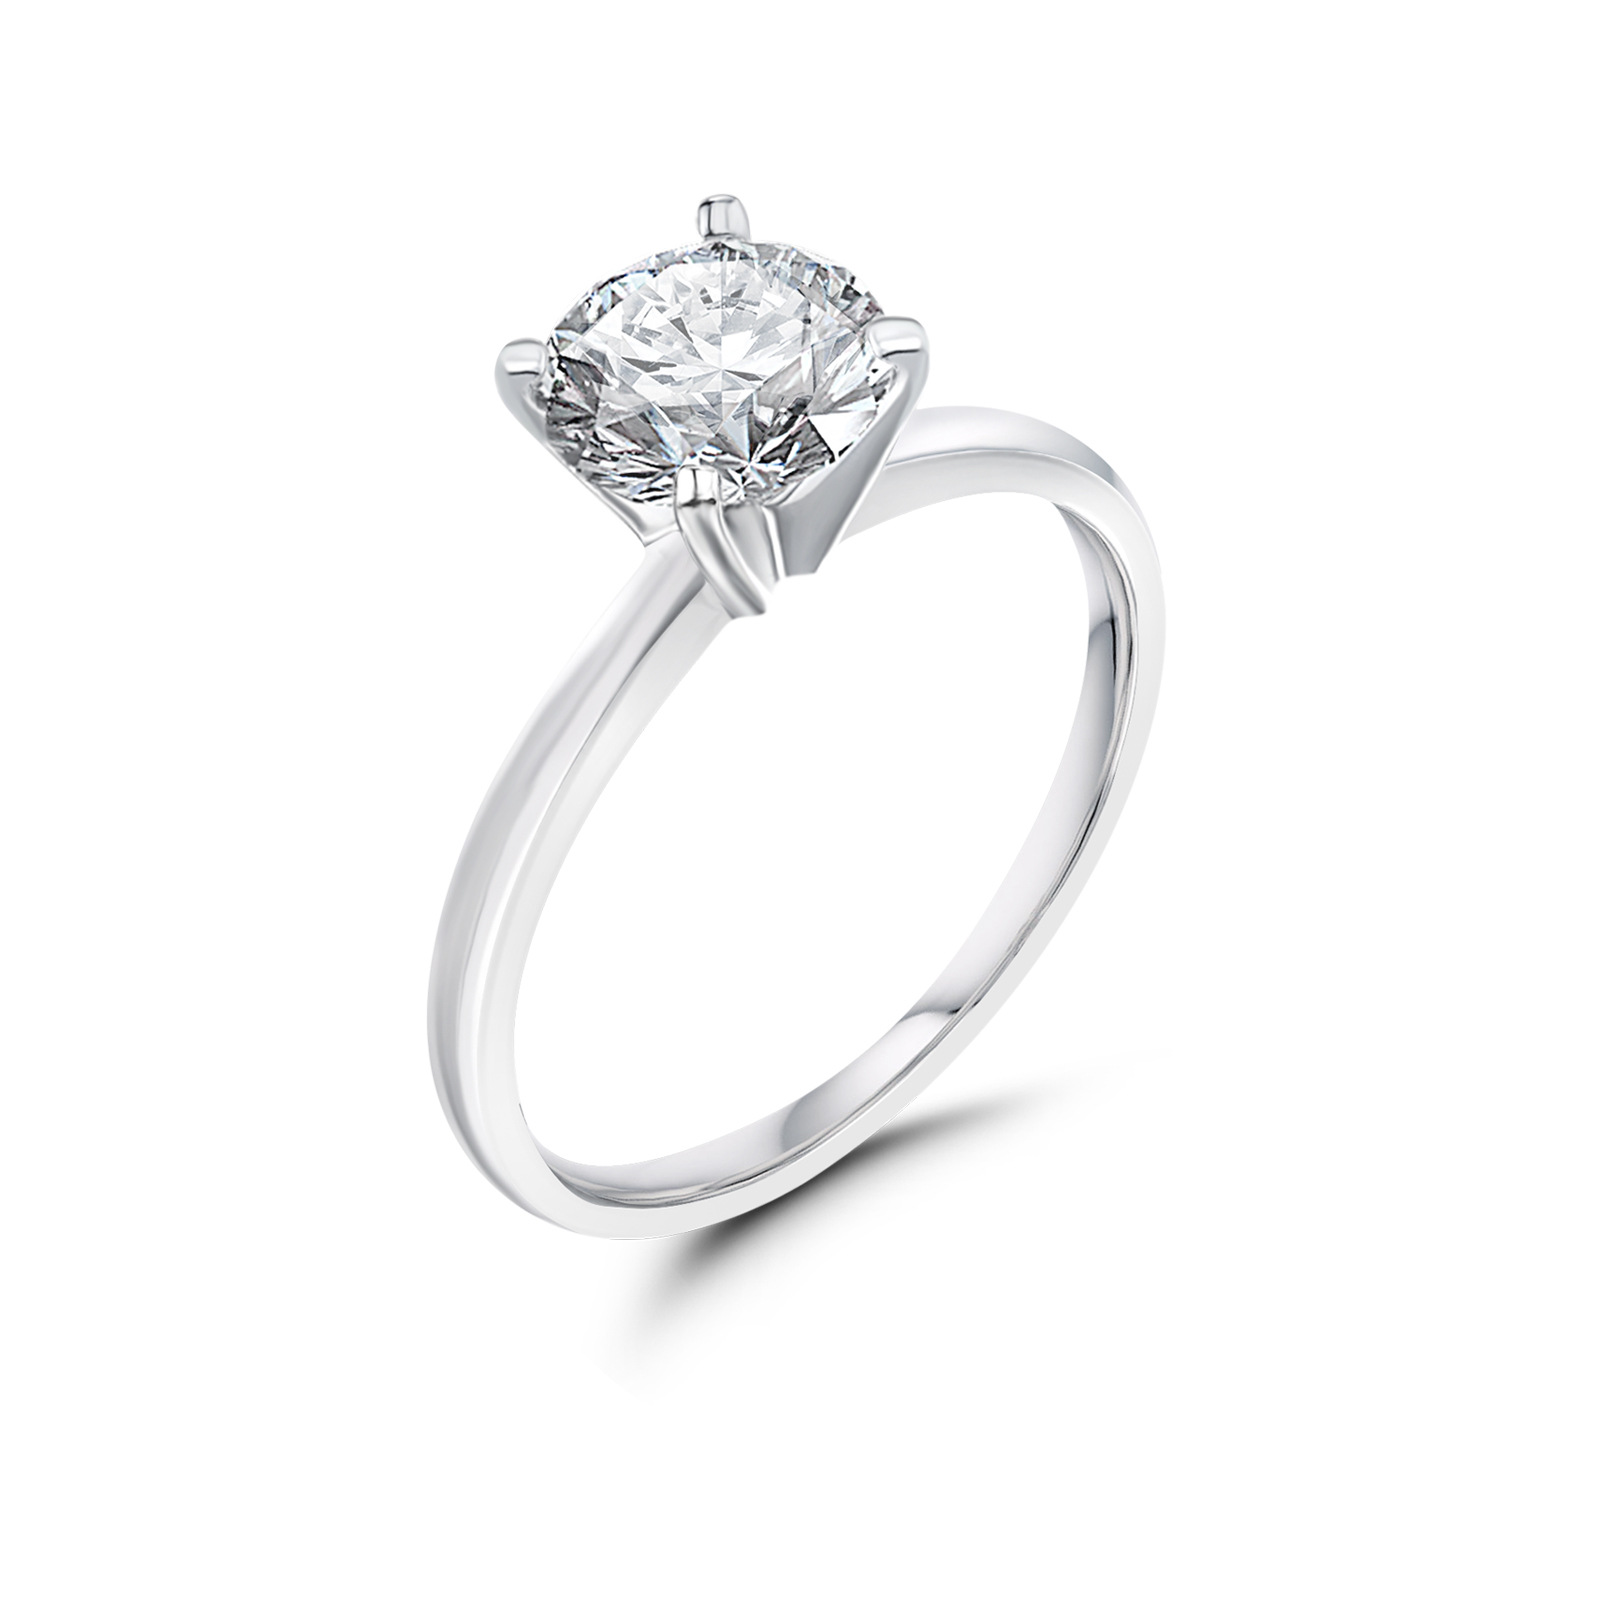 Tradition Diamond GIA Certified 1/2 CT T.W Round Diamond Solitaire Engagement Ring in 14K White Gold